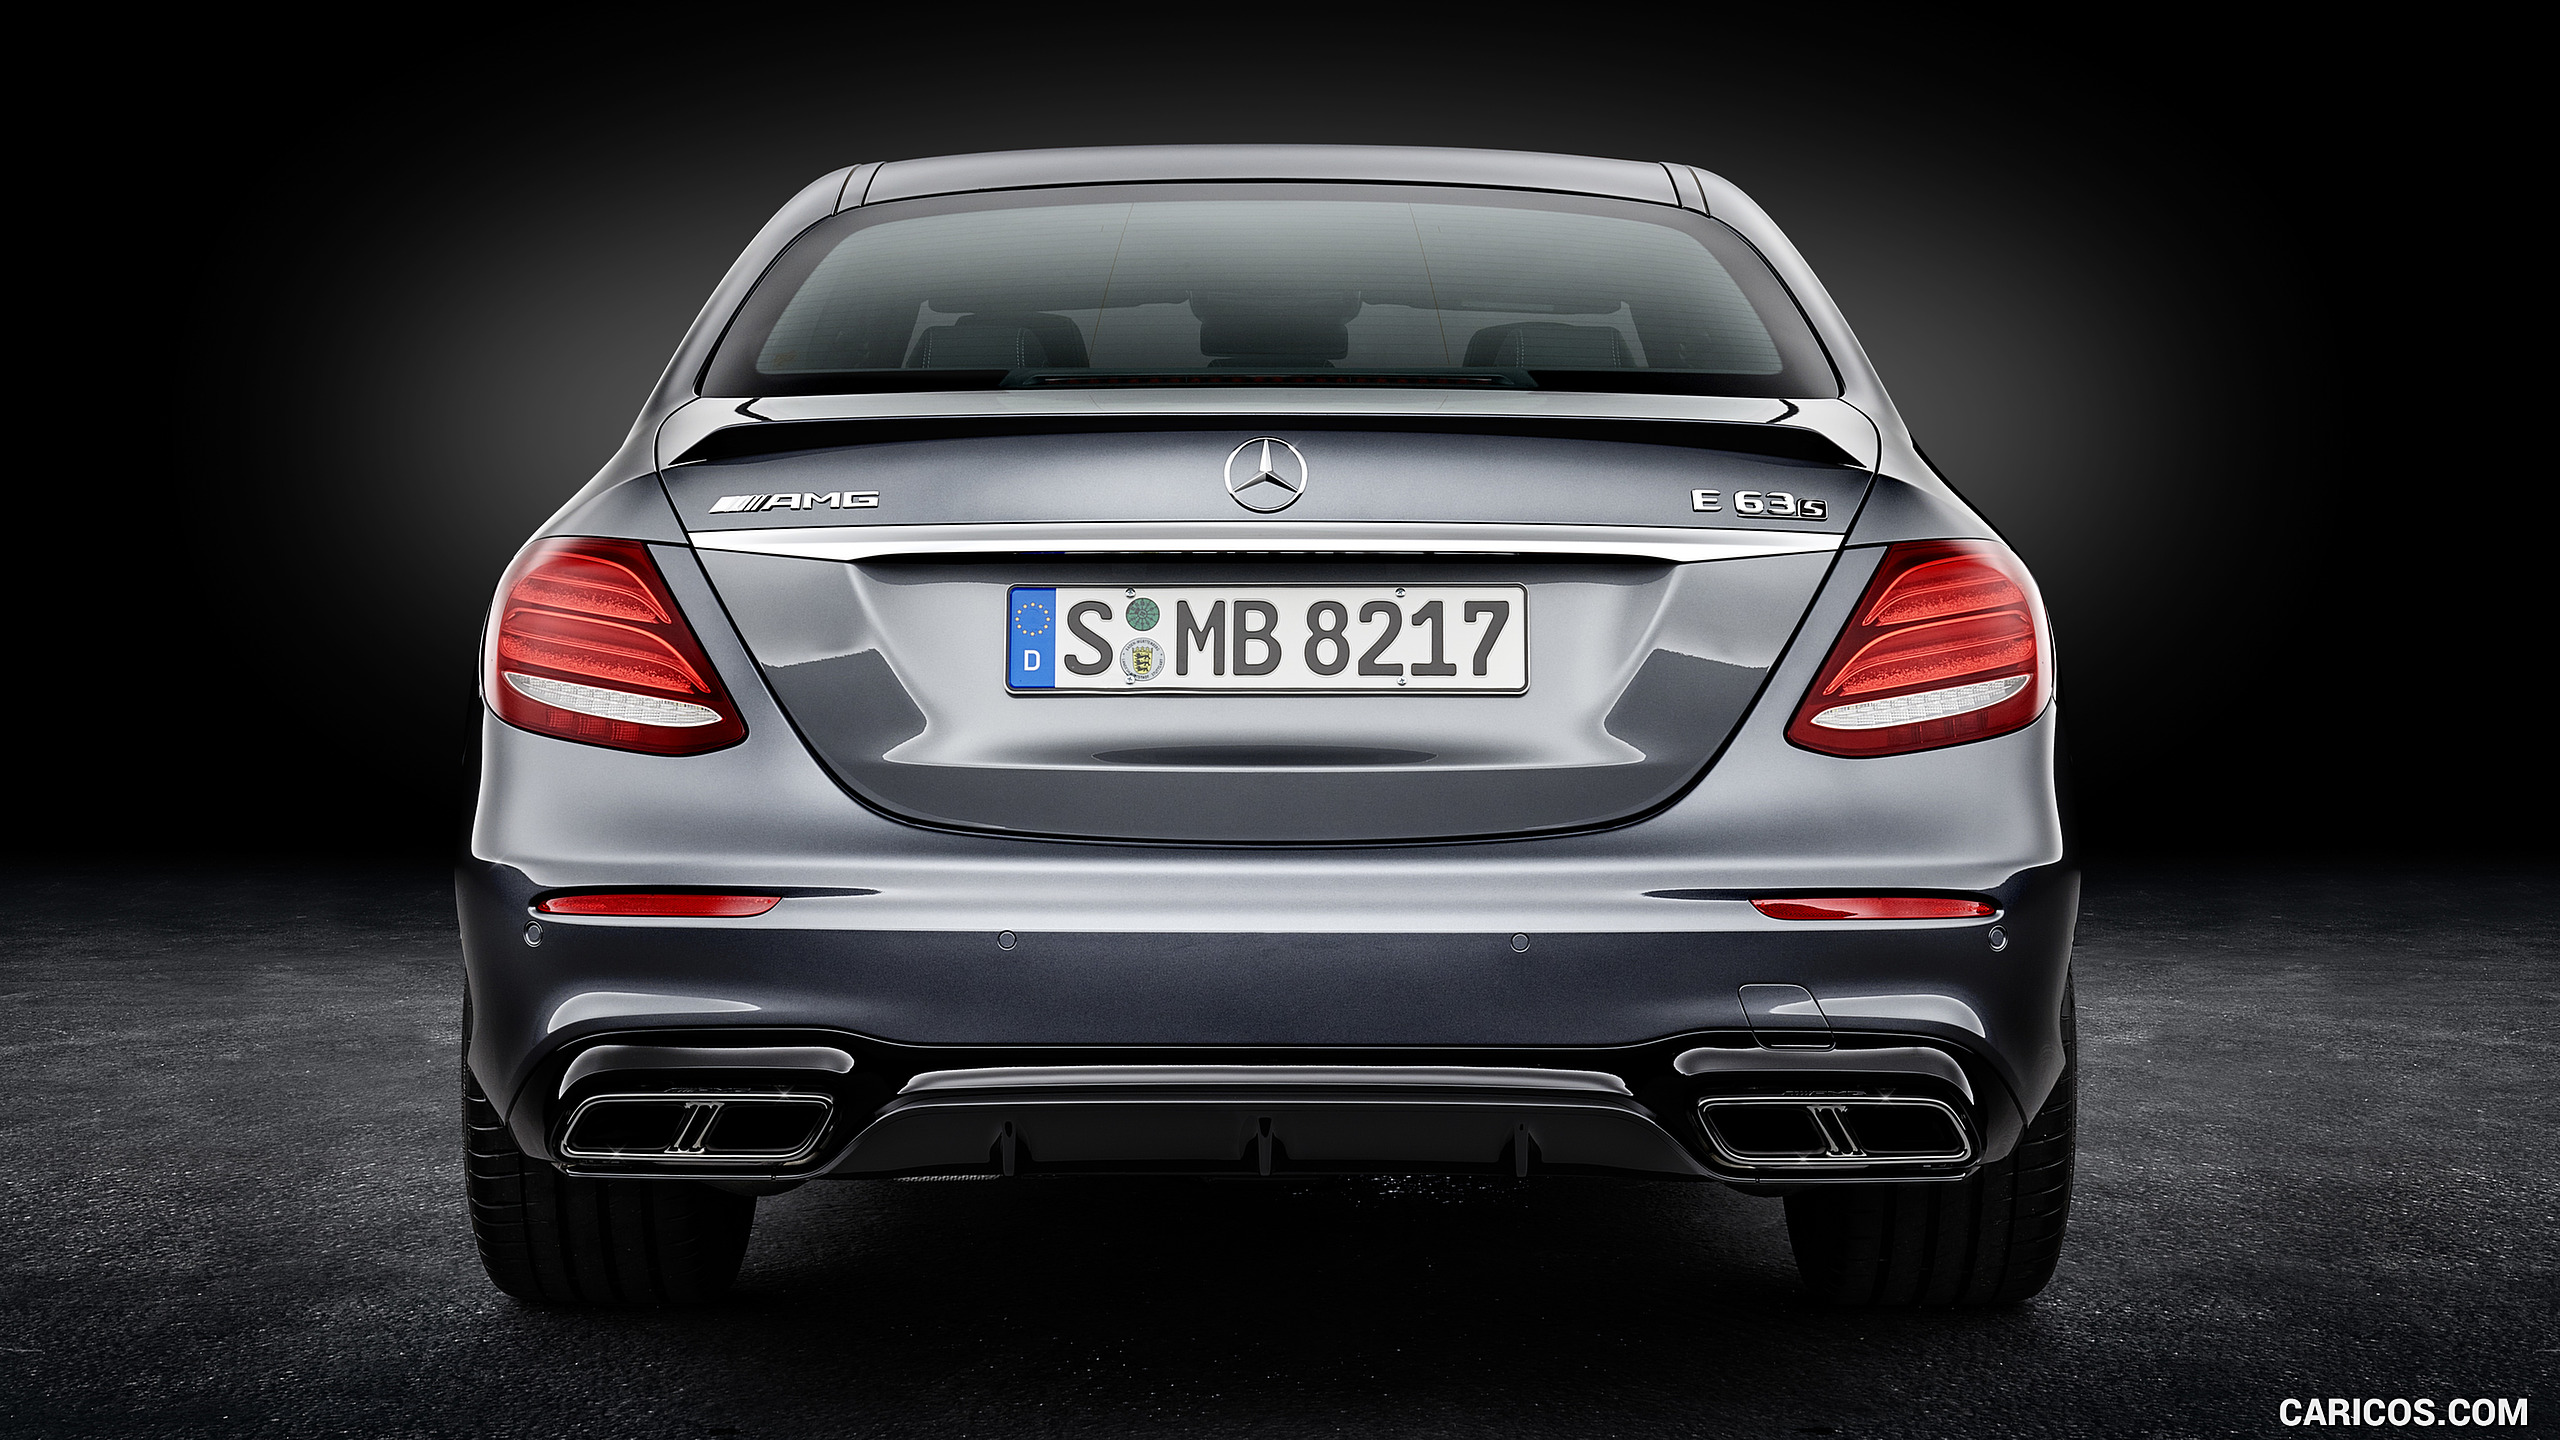 2018 Mercedes-AMG E63 S 4MATIC+ - Rear, #44 of 323